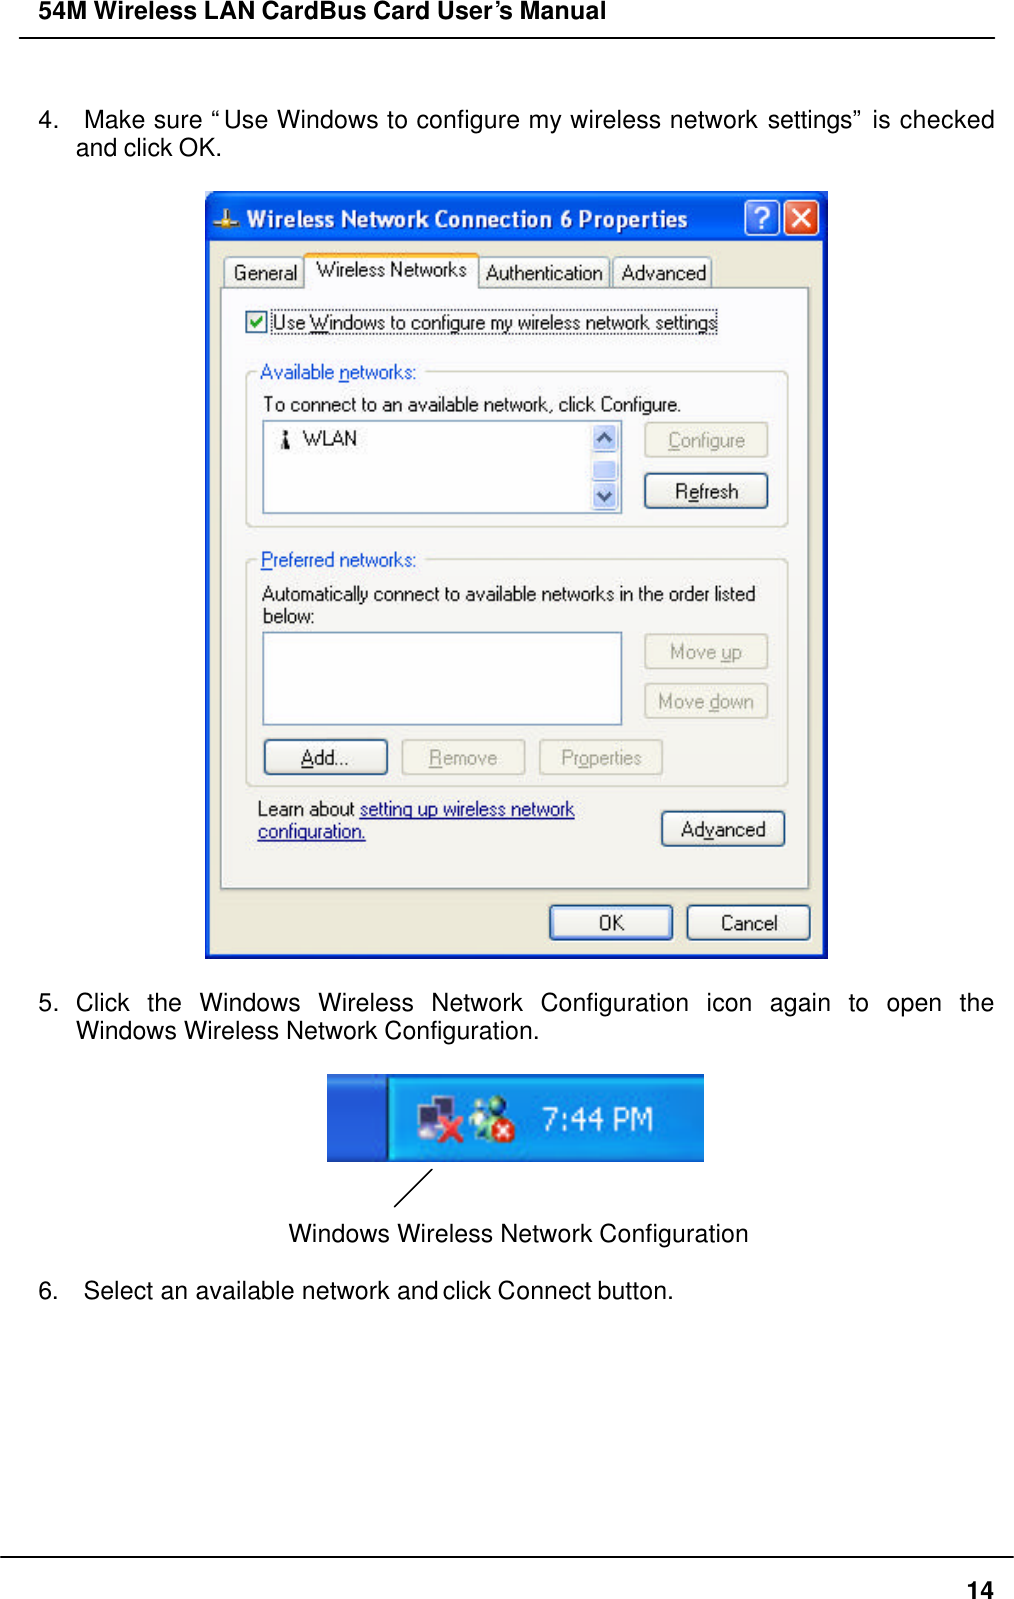 54M Wireless LAN CardBus Card User’s Manual  14  4.  Make sure “Use Windows to configure my wireless network settings”  is checked and click OK.    5. Click the Windows Wireless Network Configuration icon again to open the Windows Wireless Network Configuration.     Windows Wireless Network Configuration  6.  Select an available network and click Connect button.  